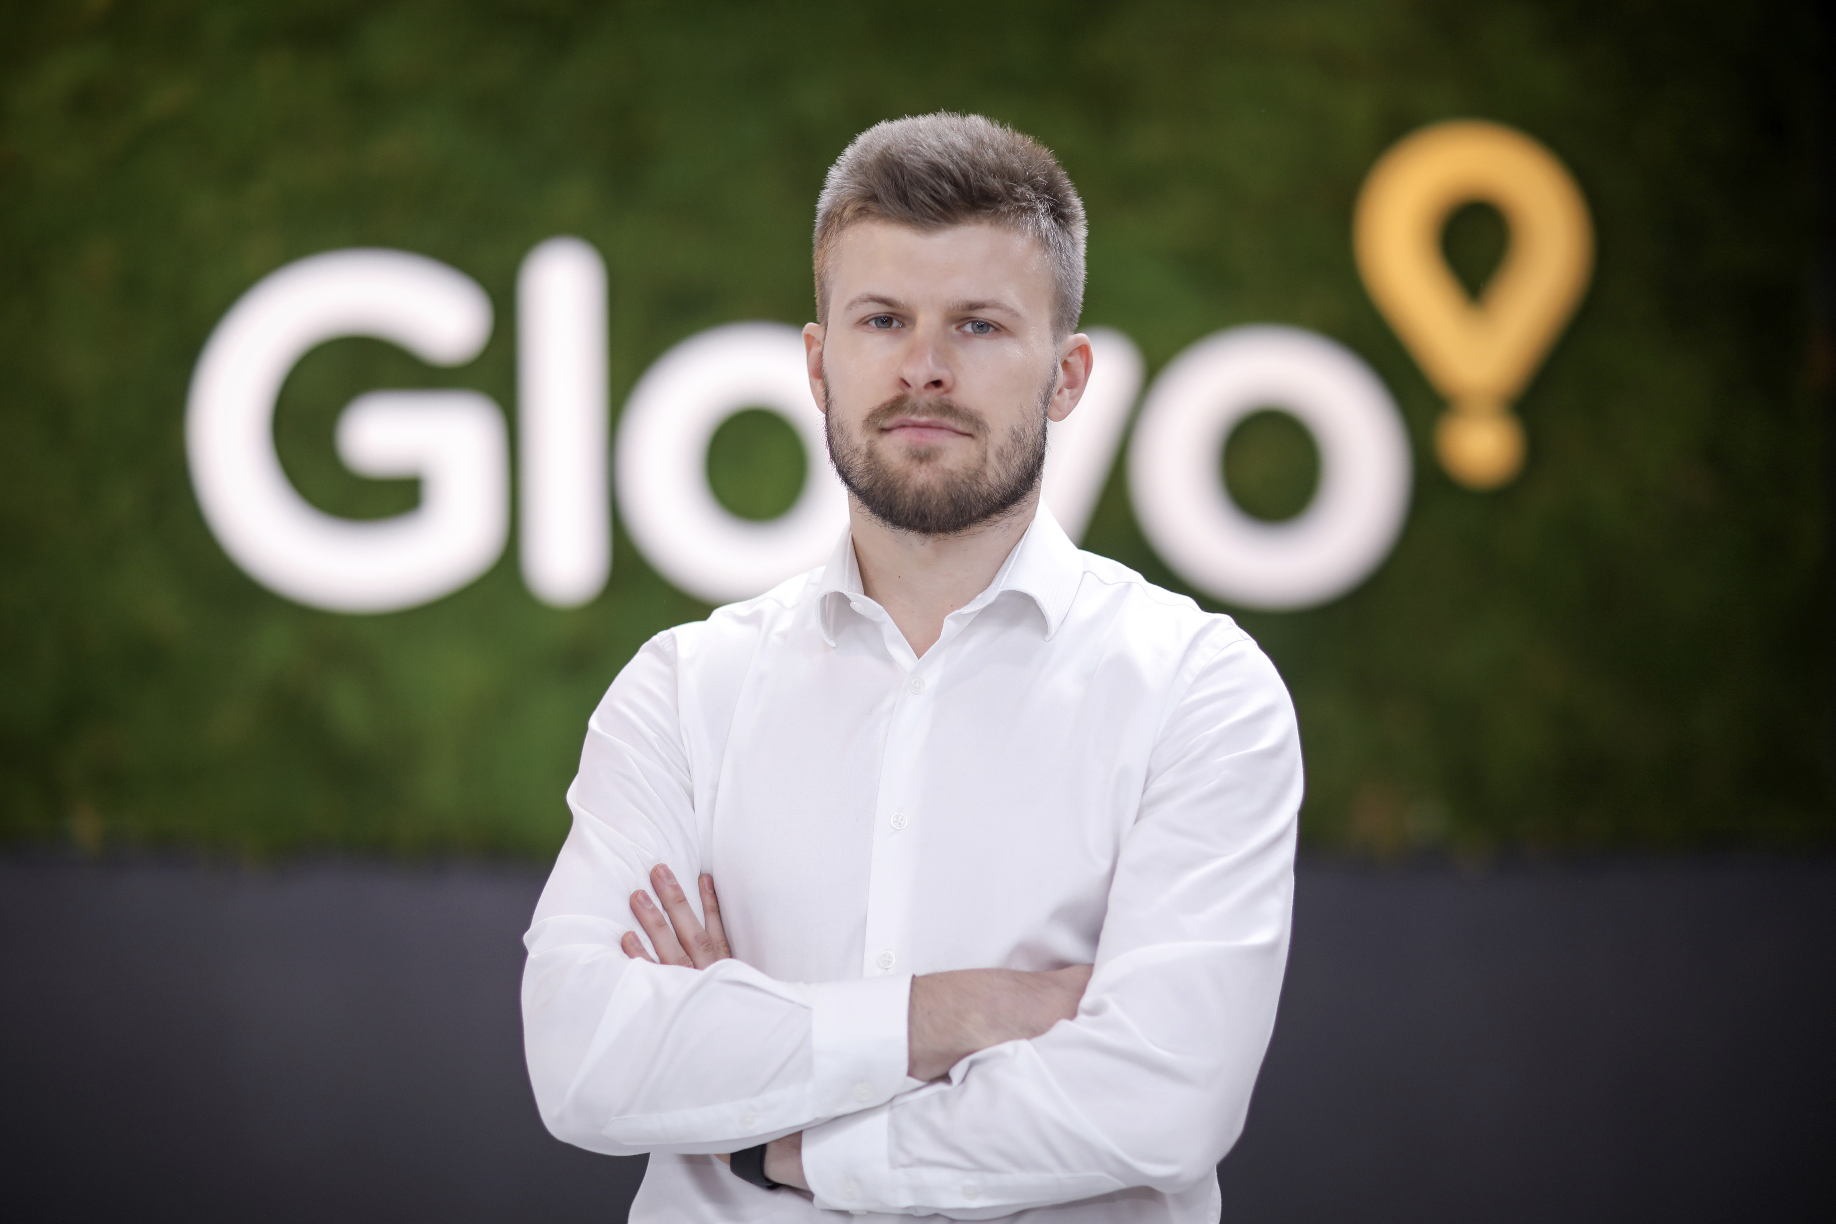 Dmitry Rasnovsky, GM Glovo Ukraine: “Mother told me: “First you think – then you do”. In Glovo we act – then think”